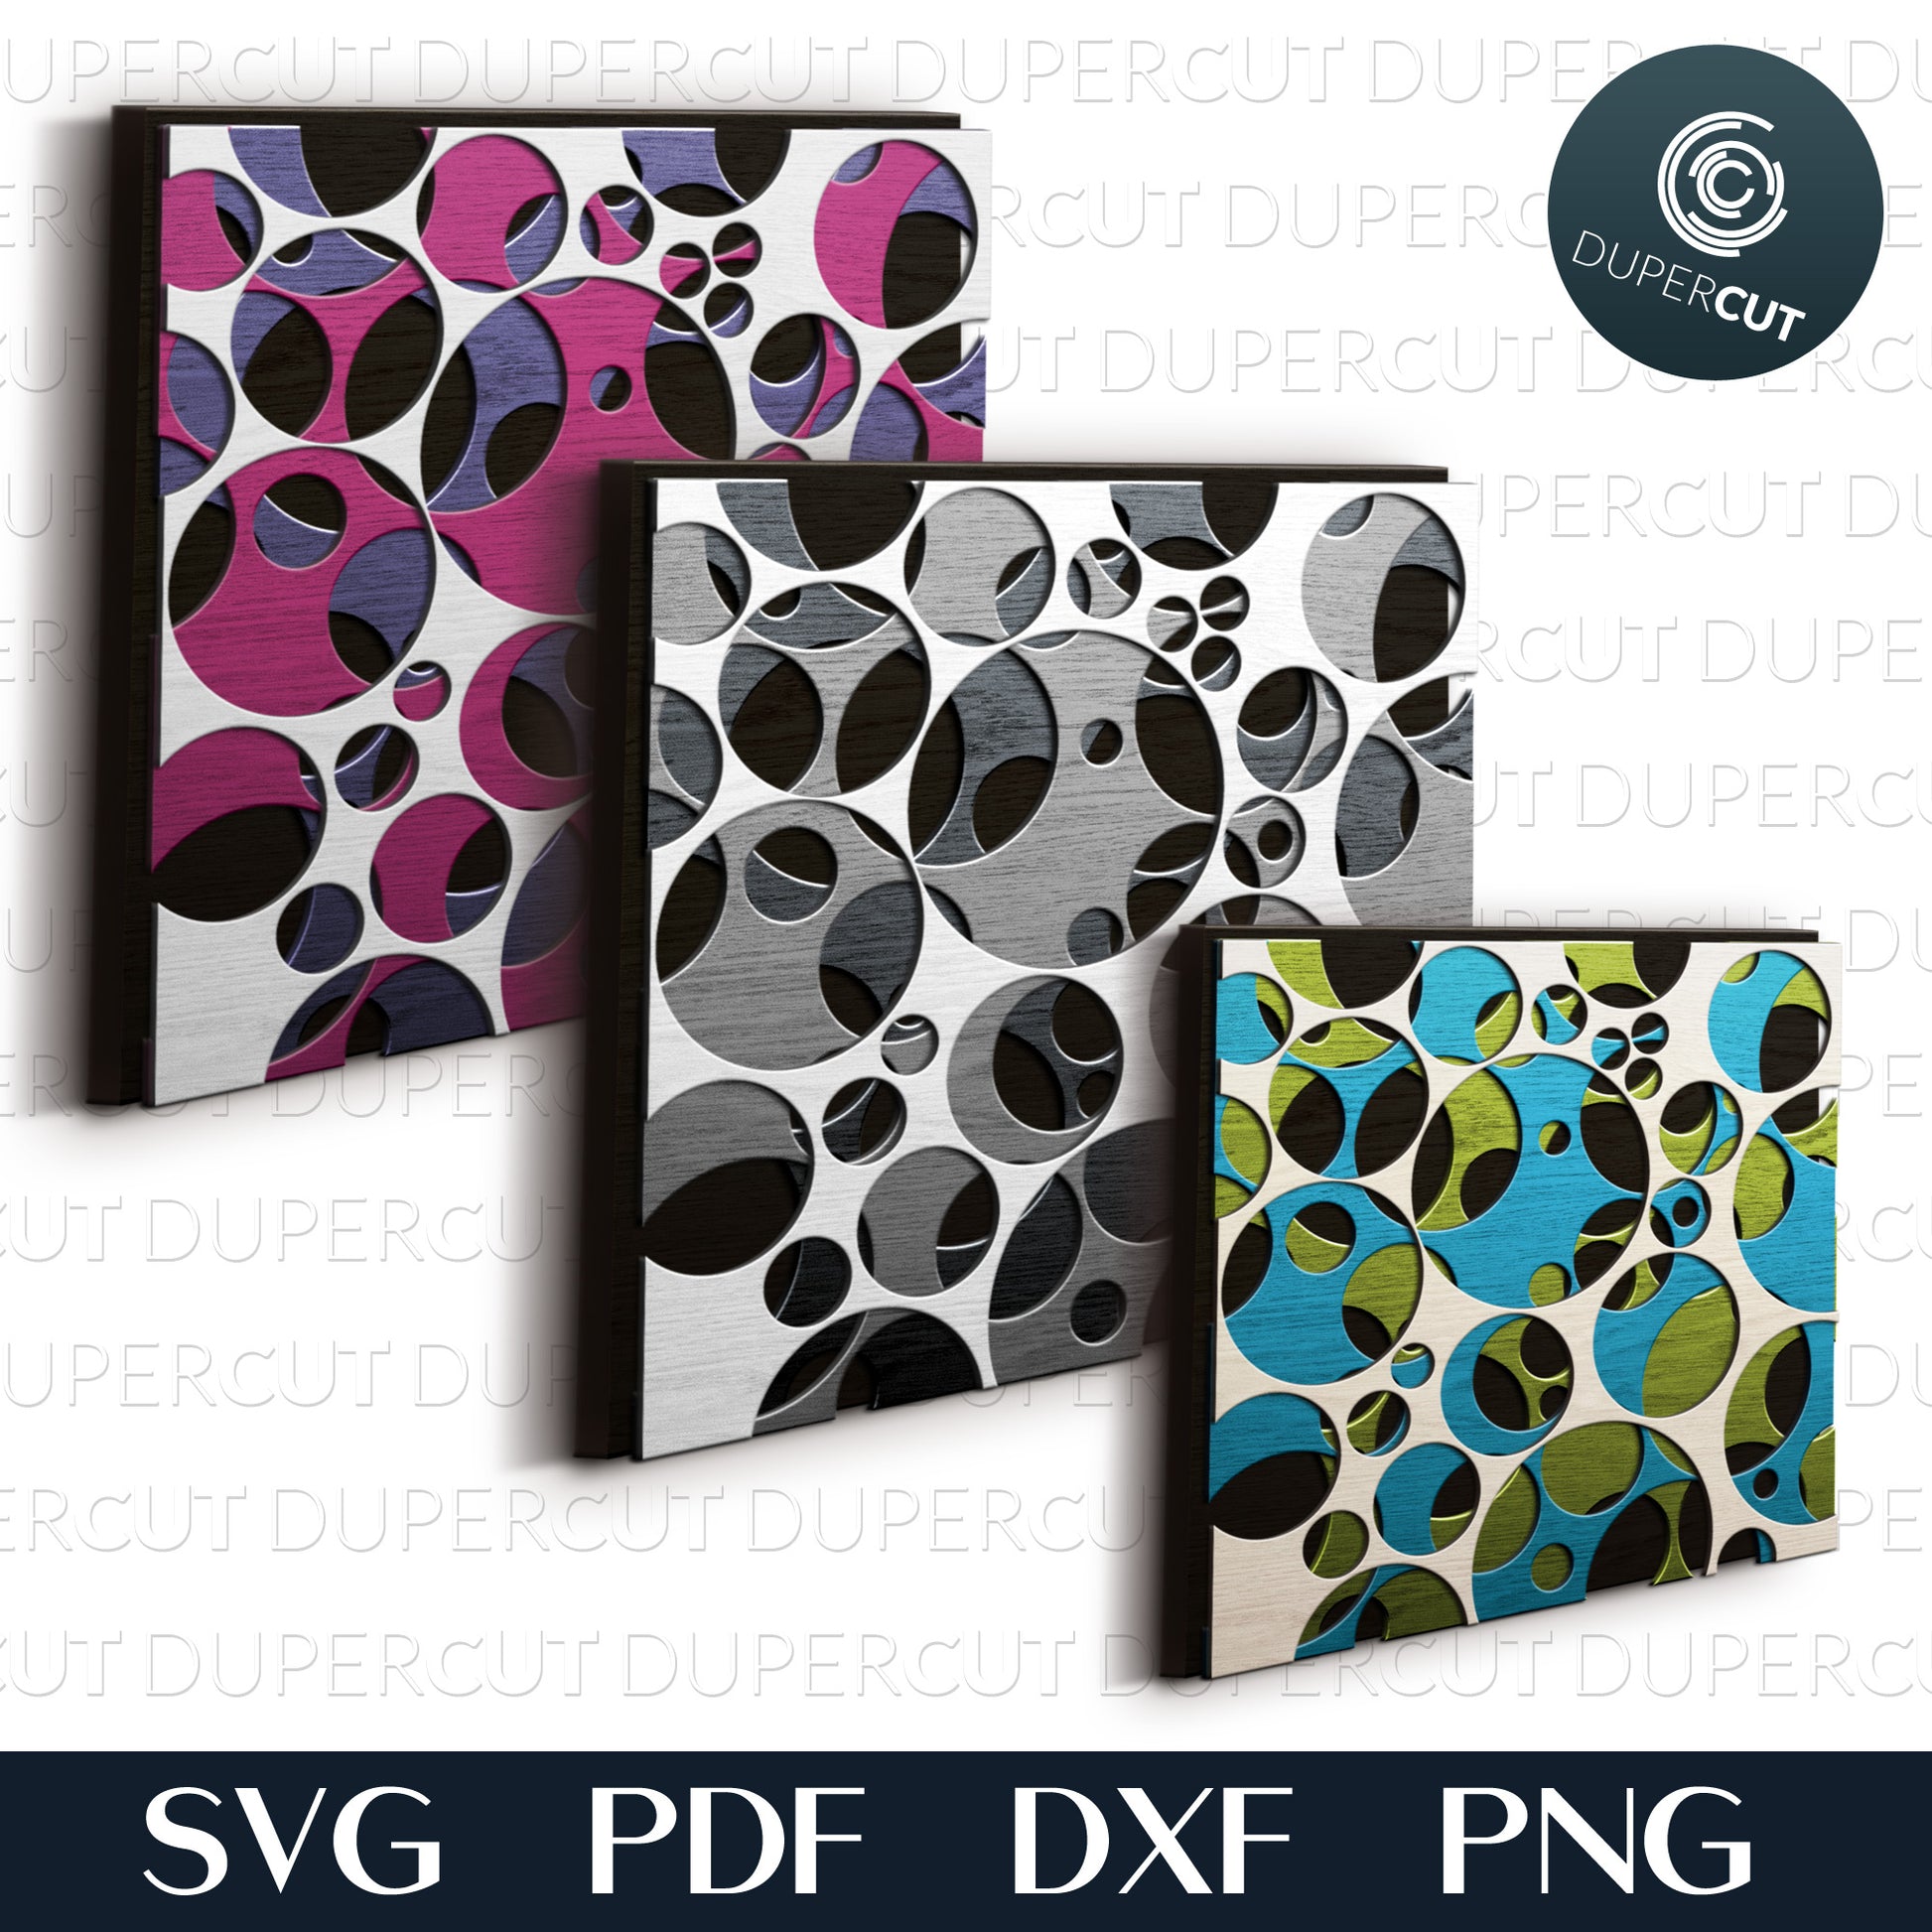 DIIY Wall art Abstract circles multi-layered files, SVG PDF DXF files for laser cutting. For use with Cricut, Glowforge, Silhouette, CNC machines.